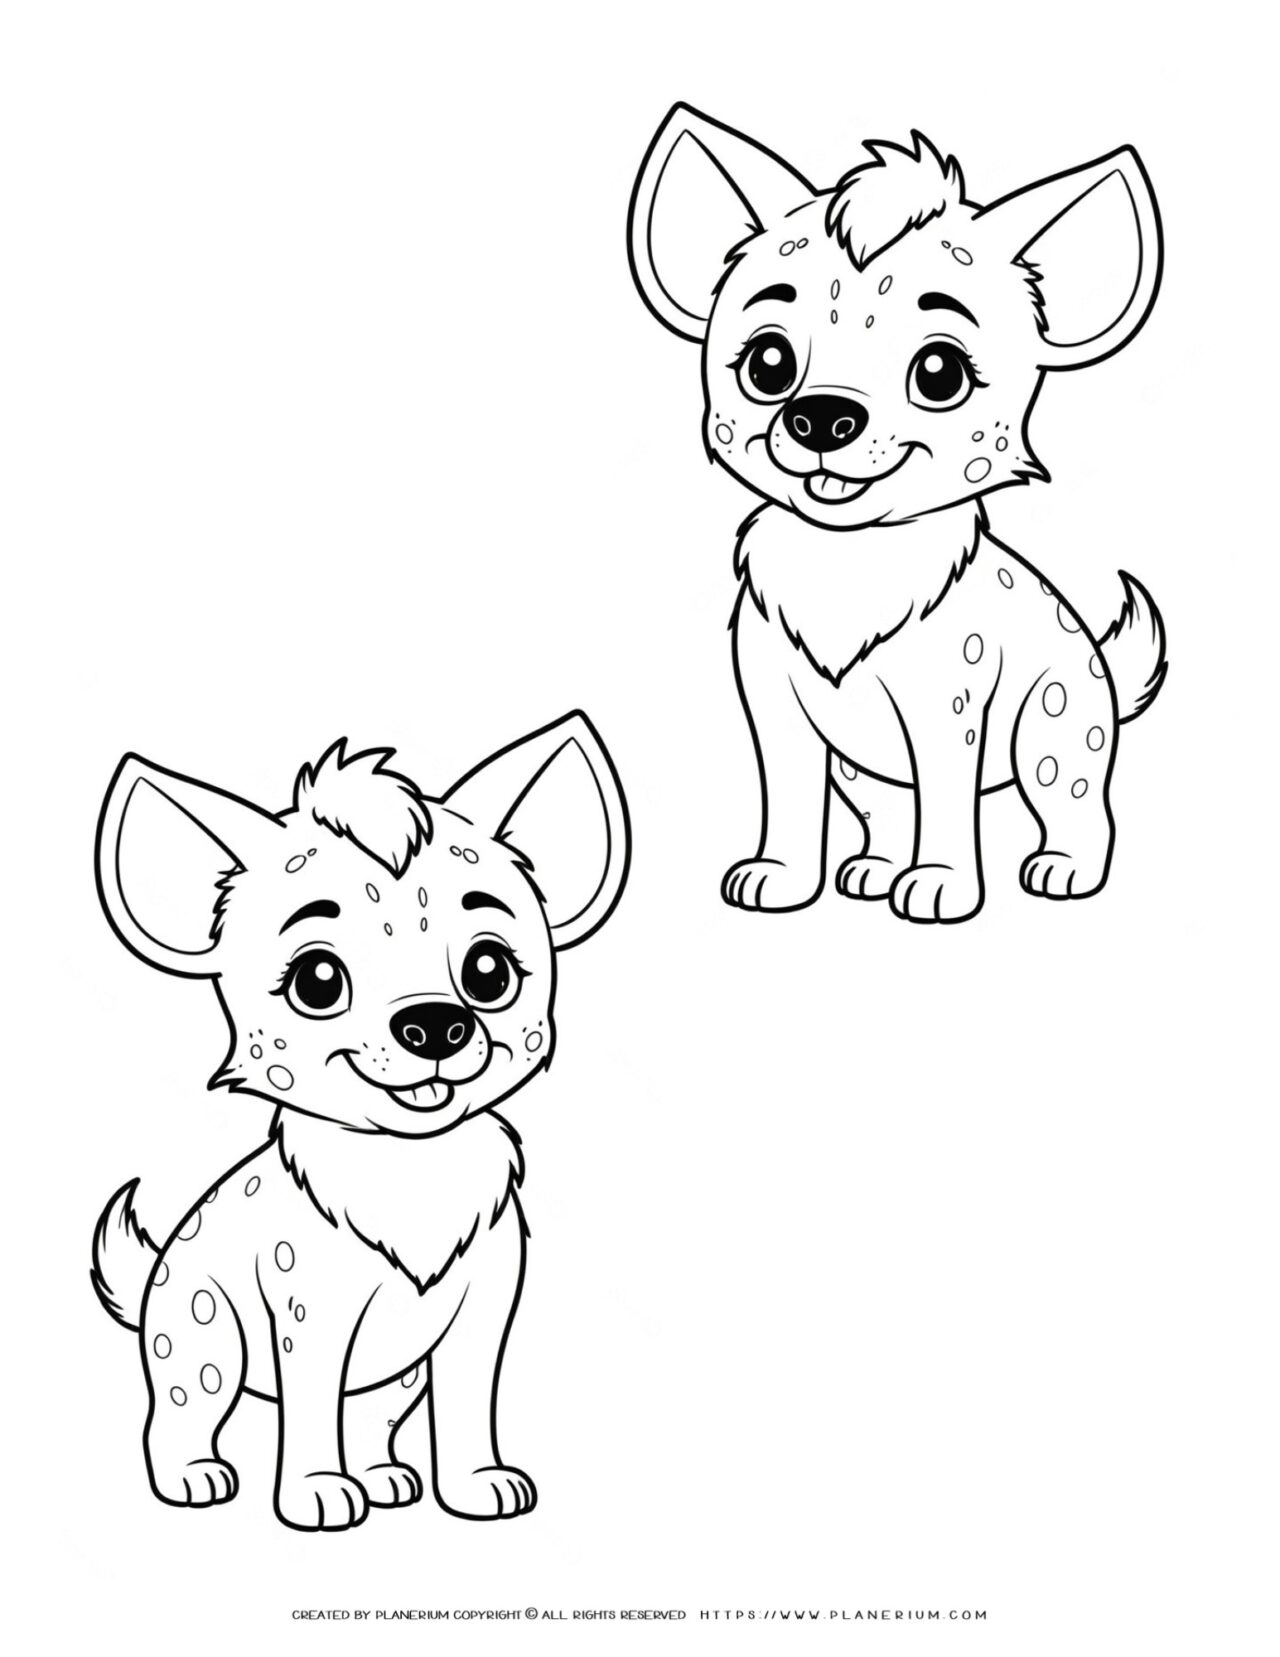 two-cute-baby-hyenas-coloring-page-for-kids